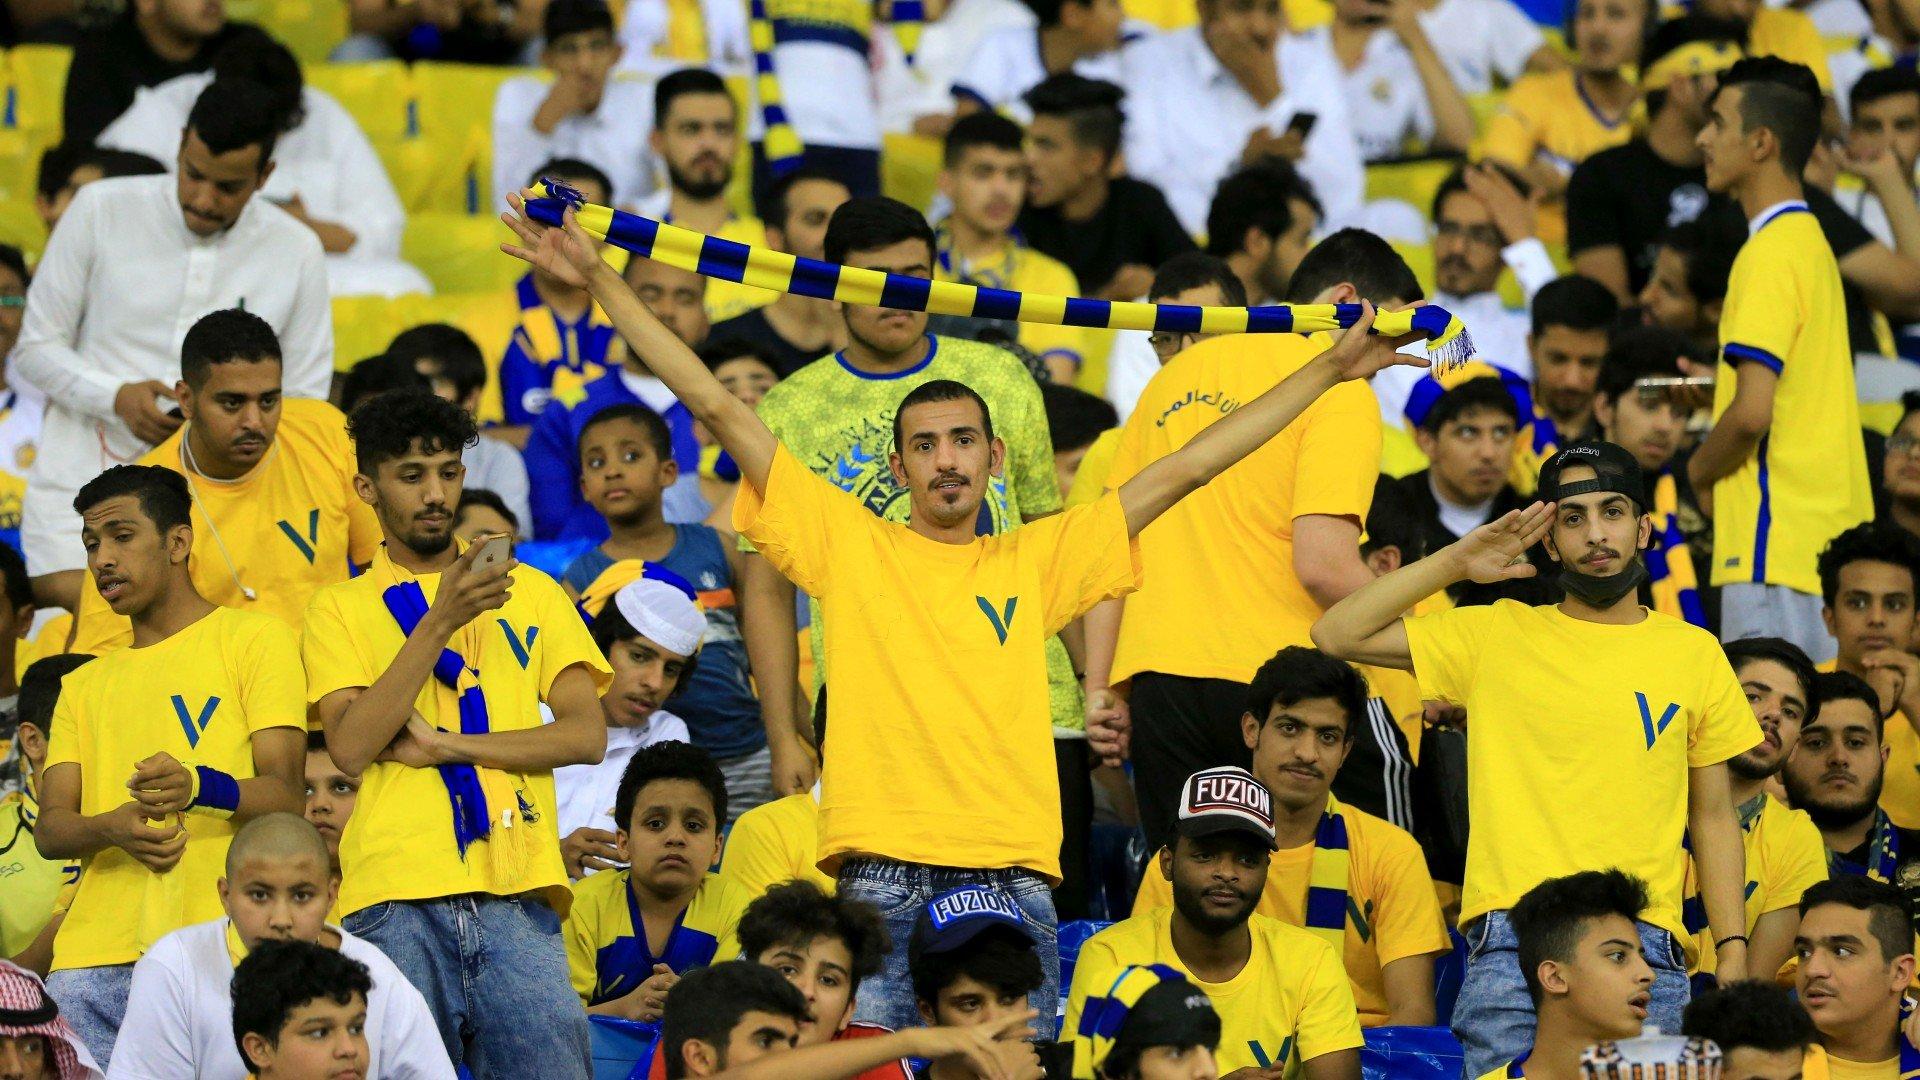 Supporters during the AFC Champions League quarter-finals football match between Saudi's Al-Nassr and Qatar's Al-Sadd at the King Fahd International Stadium in Riyadh on 26 August 2019 (AFP)